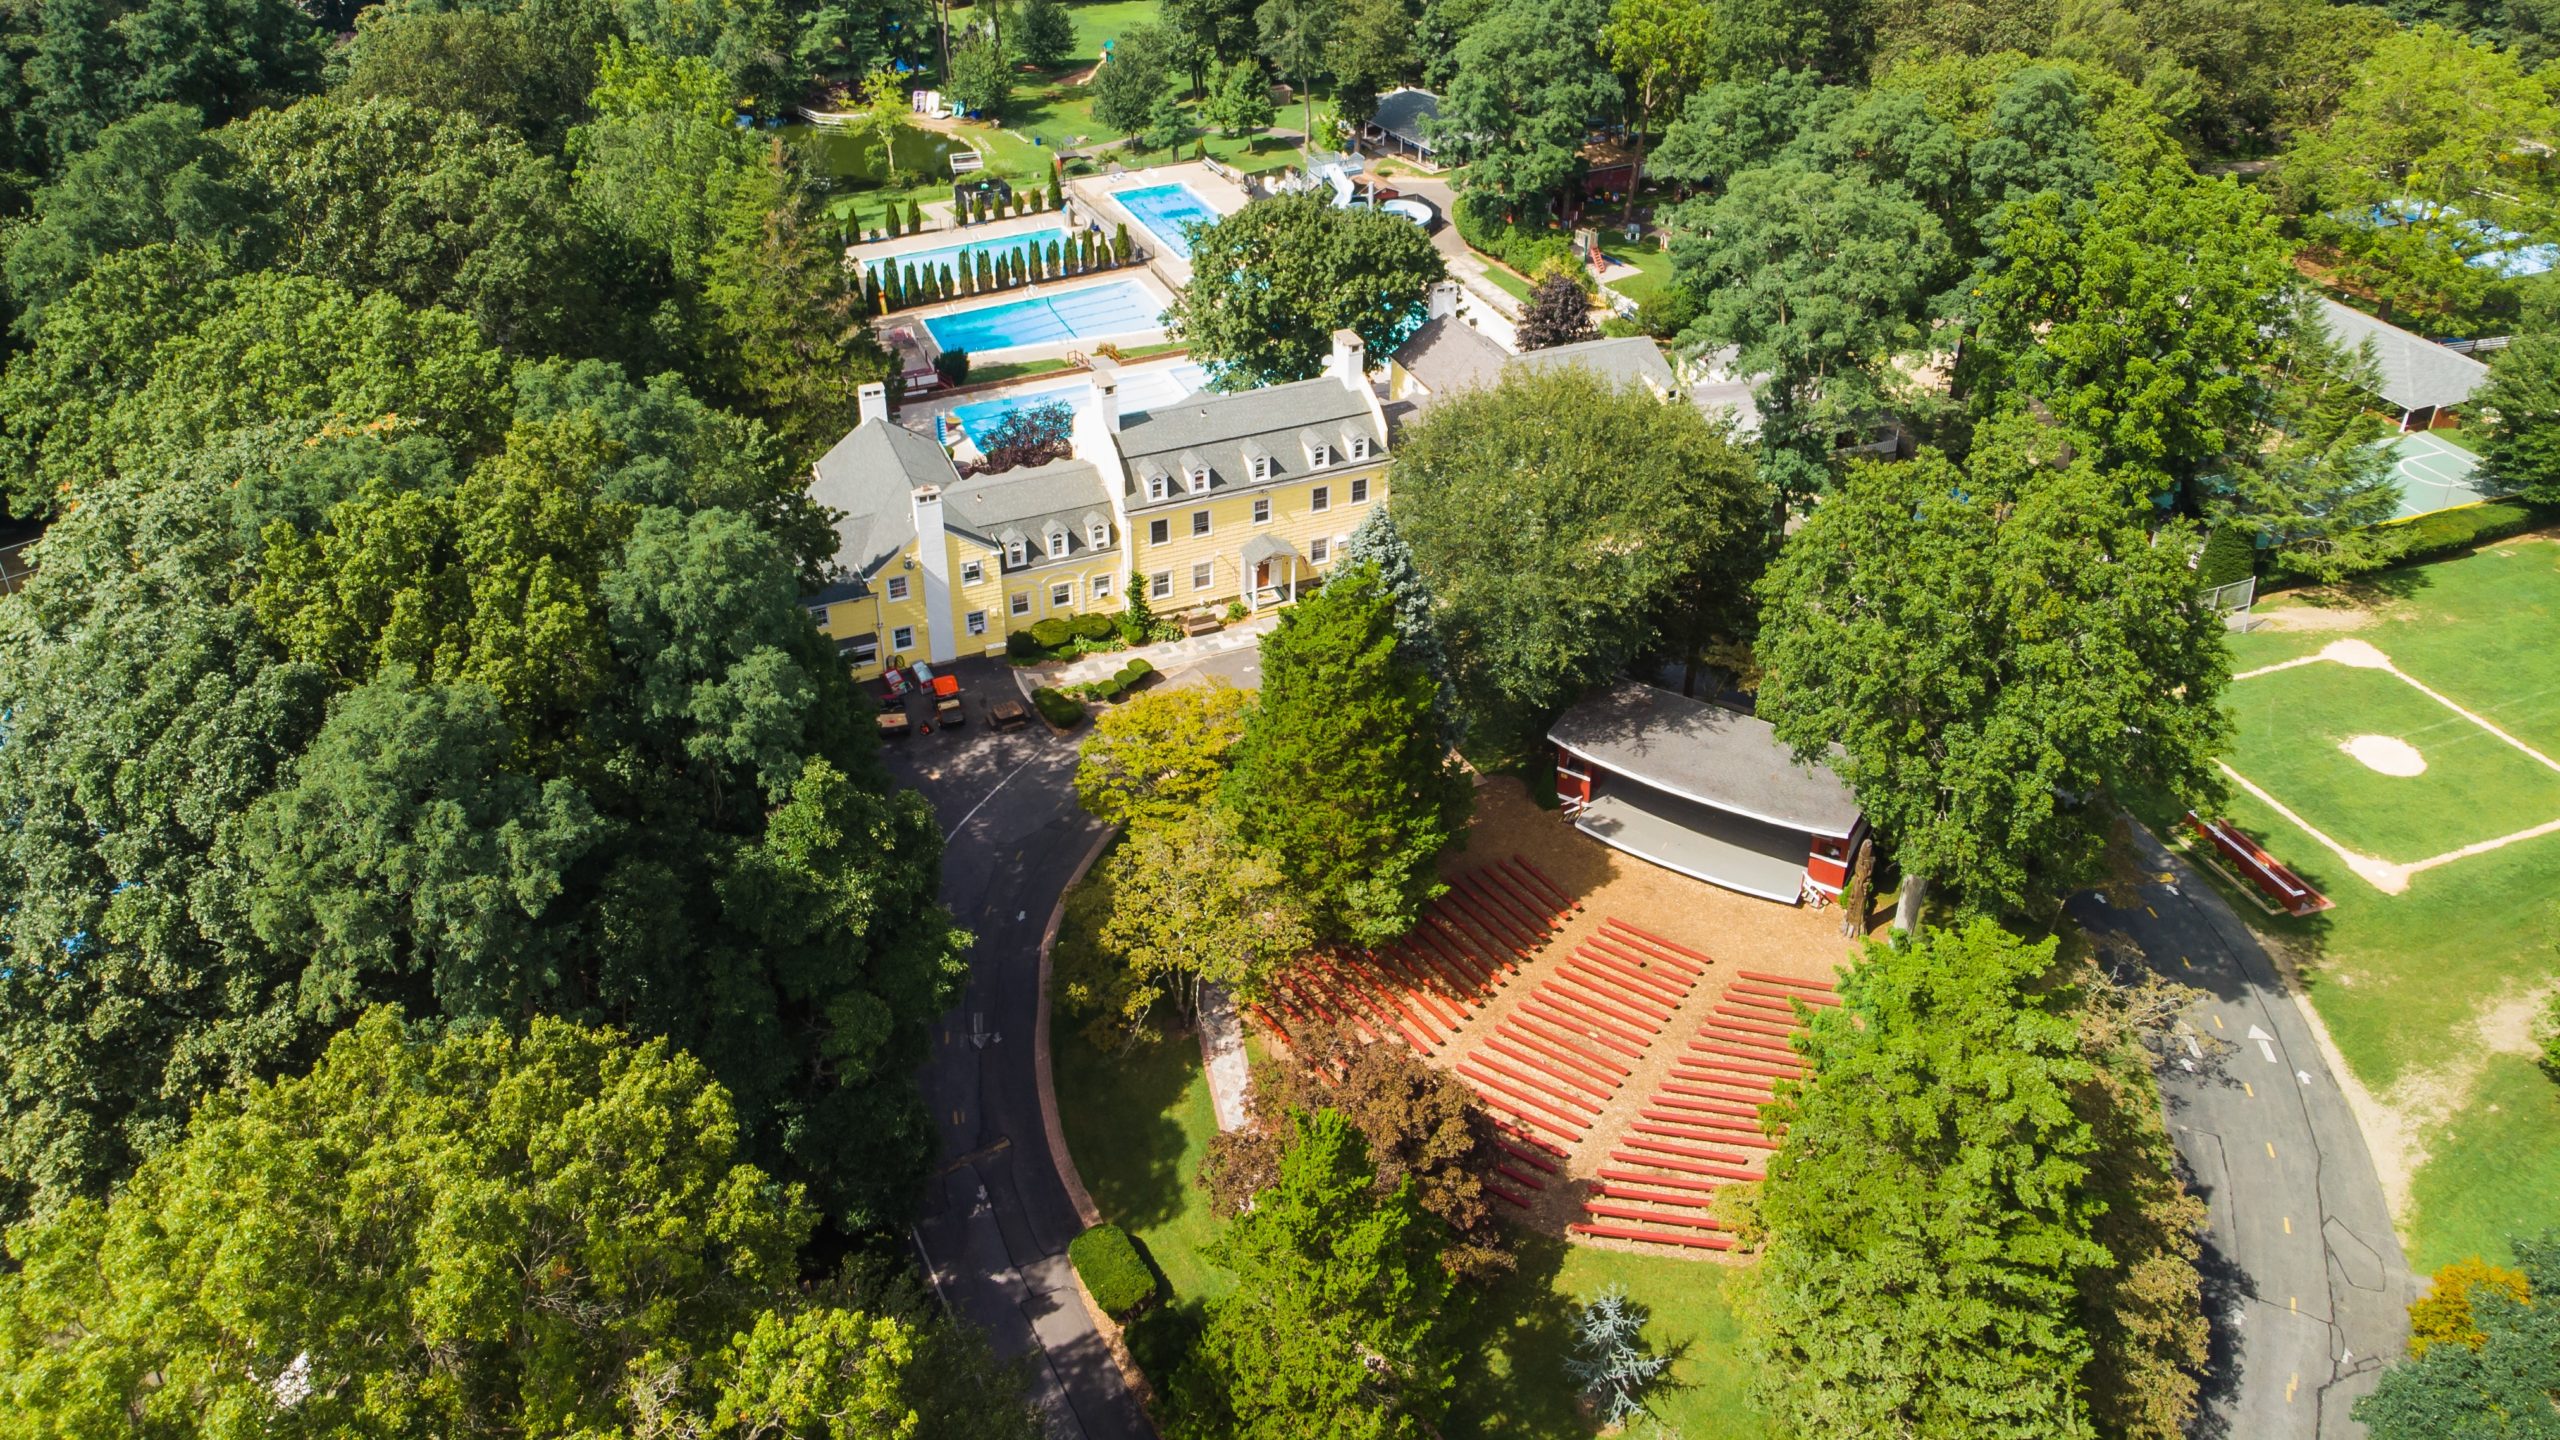 An aerial photo of green lawns and trees around an outdoor theater, swimming pools and a school building!